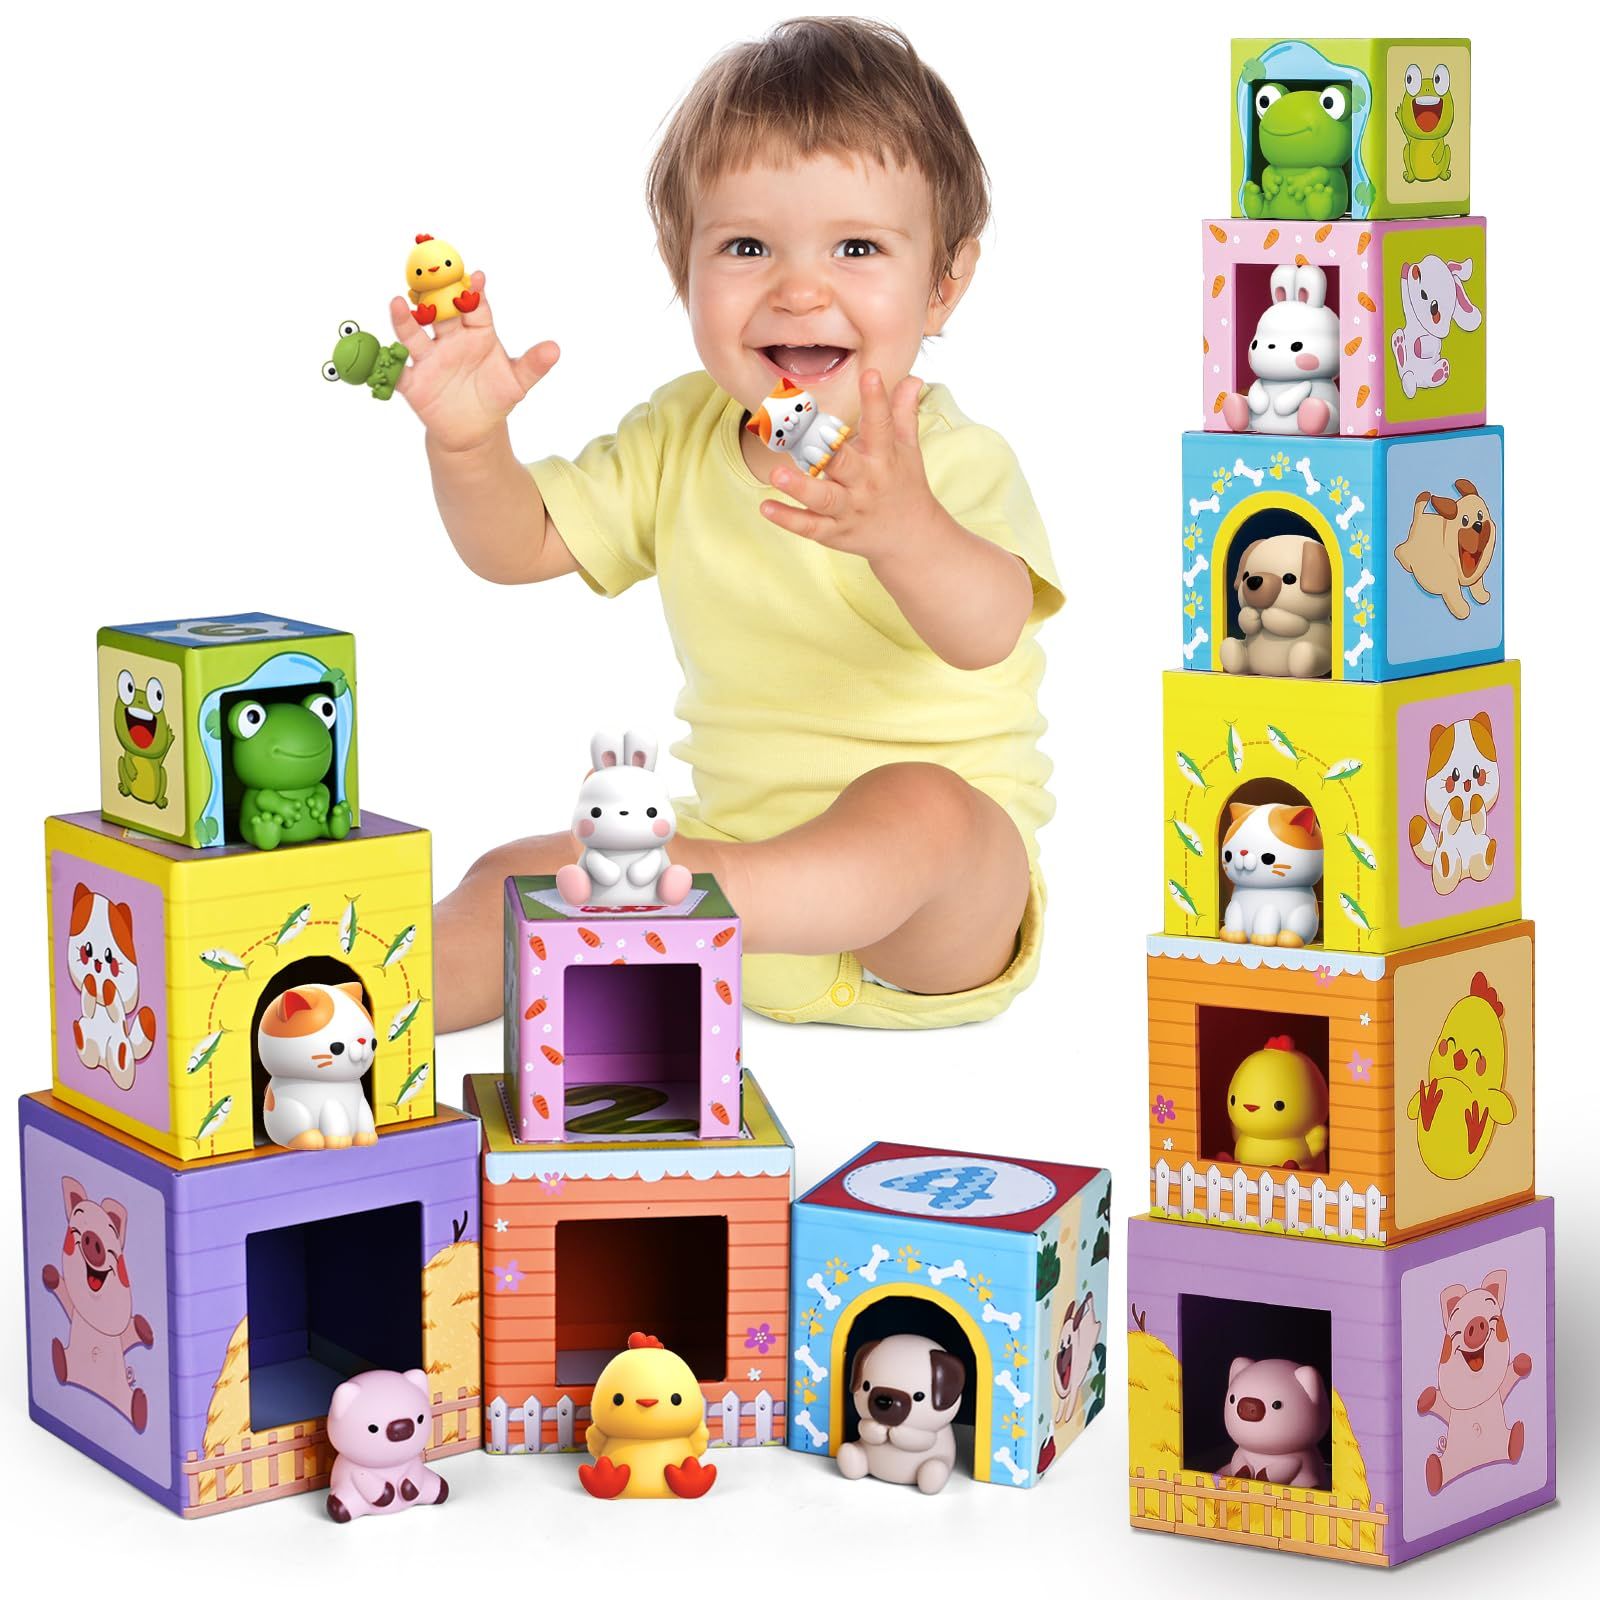 20 Best Gifts and Toys for 1 Year Olds - The Baby Vine